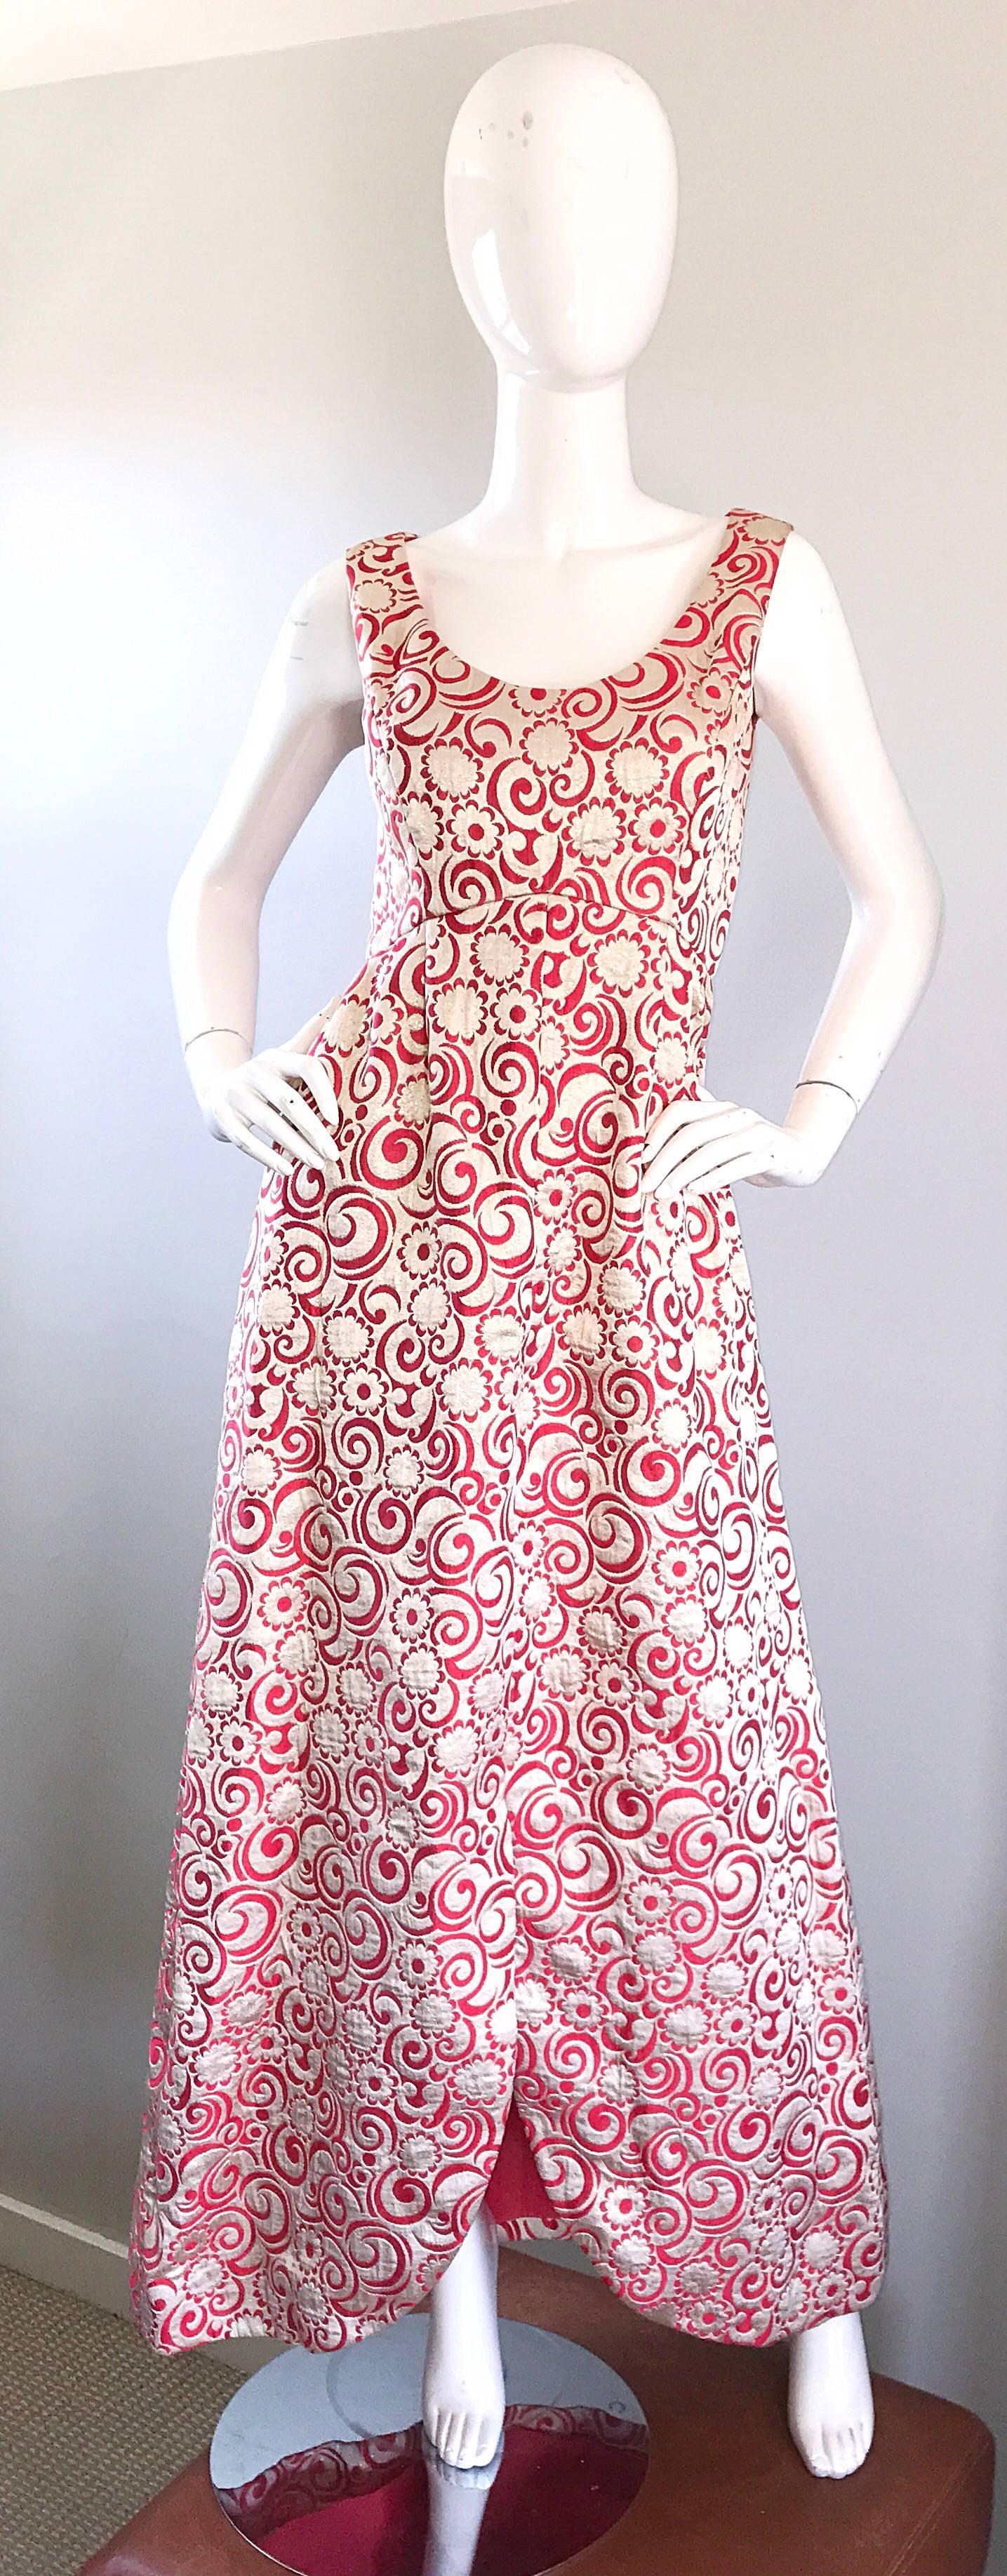 Spectacular 1960s CEIL CHAPMAN gold metallic and raspberry pink silk brocade flowers and swirls printed full length evening dress! Features pink flowers and swirls throughout. Elegant tulip hem creates a dramatic affect when worn. POCKETS at each